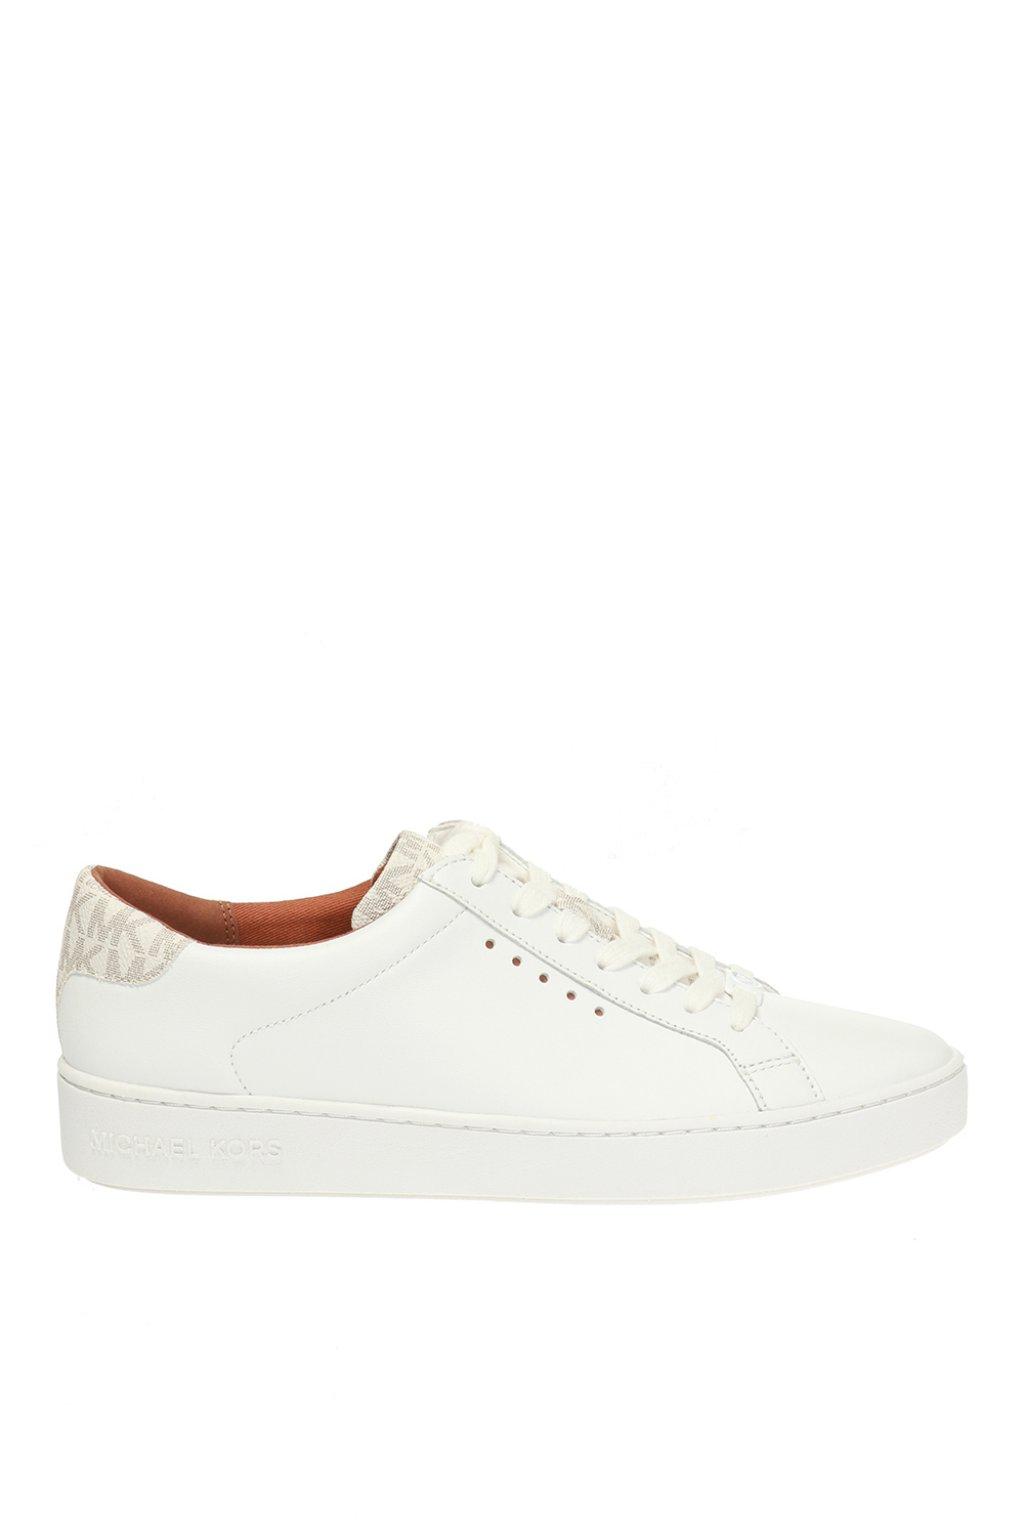 Michael Kors Leather Branded Sneakers in White - Lyst